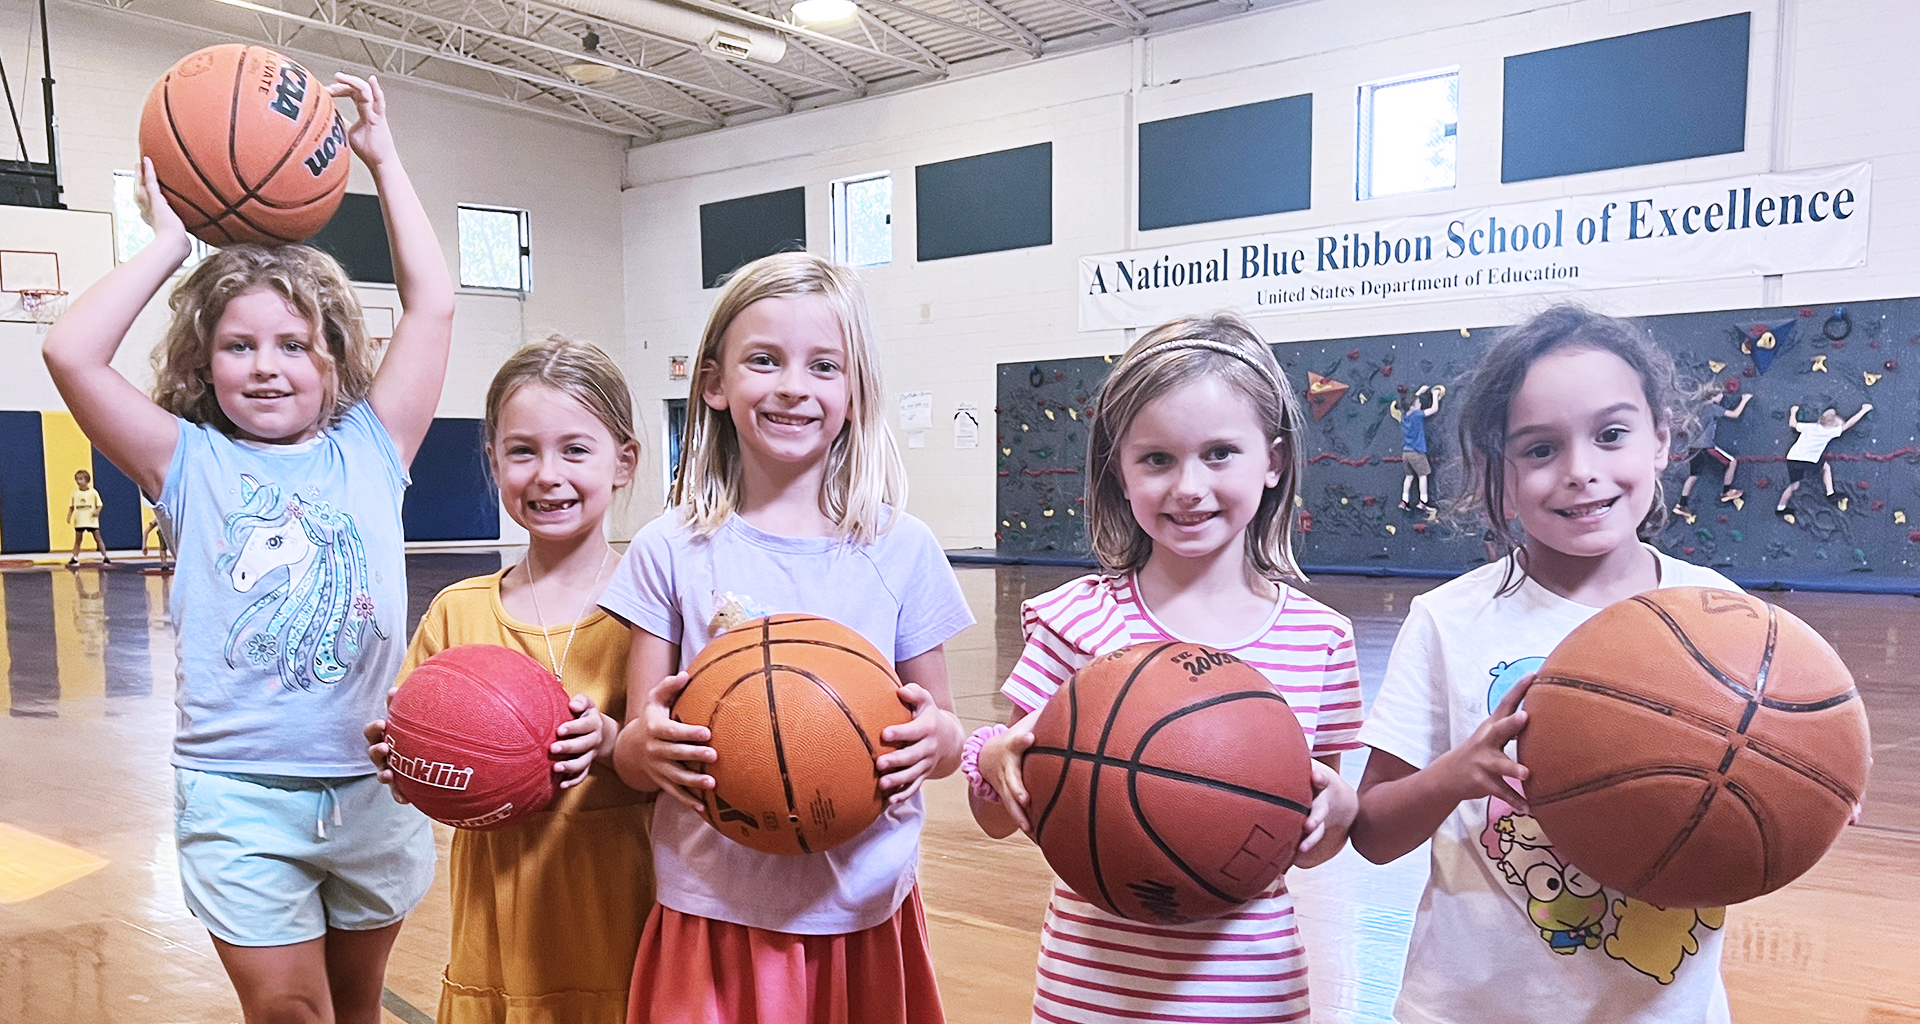 Five girls holding basketballs in the gym.